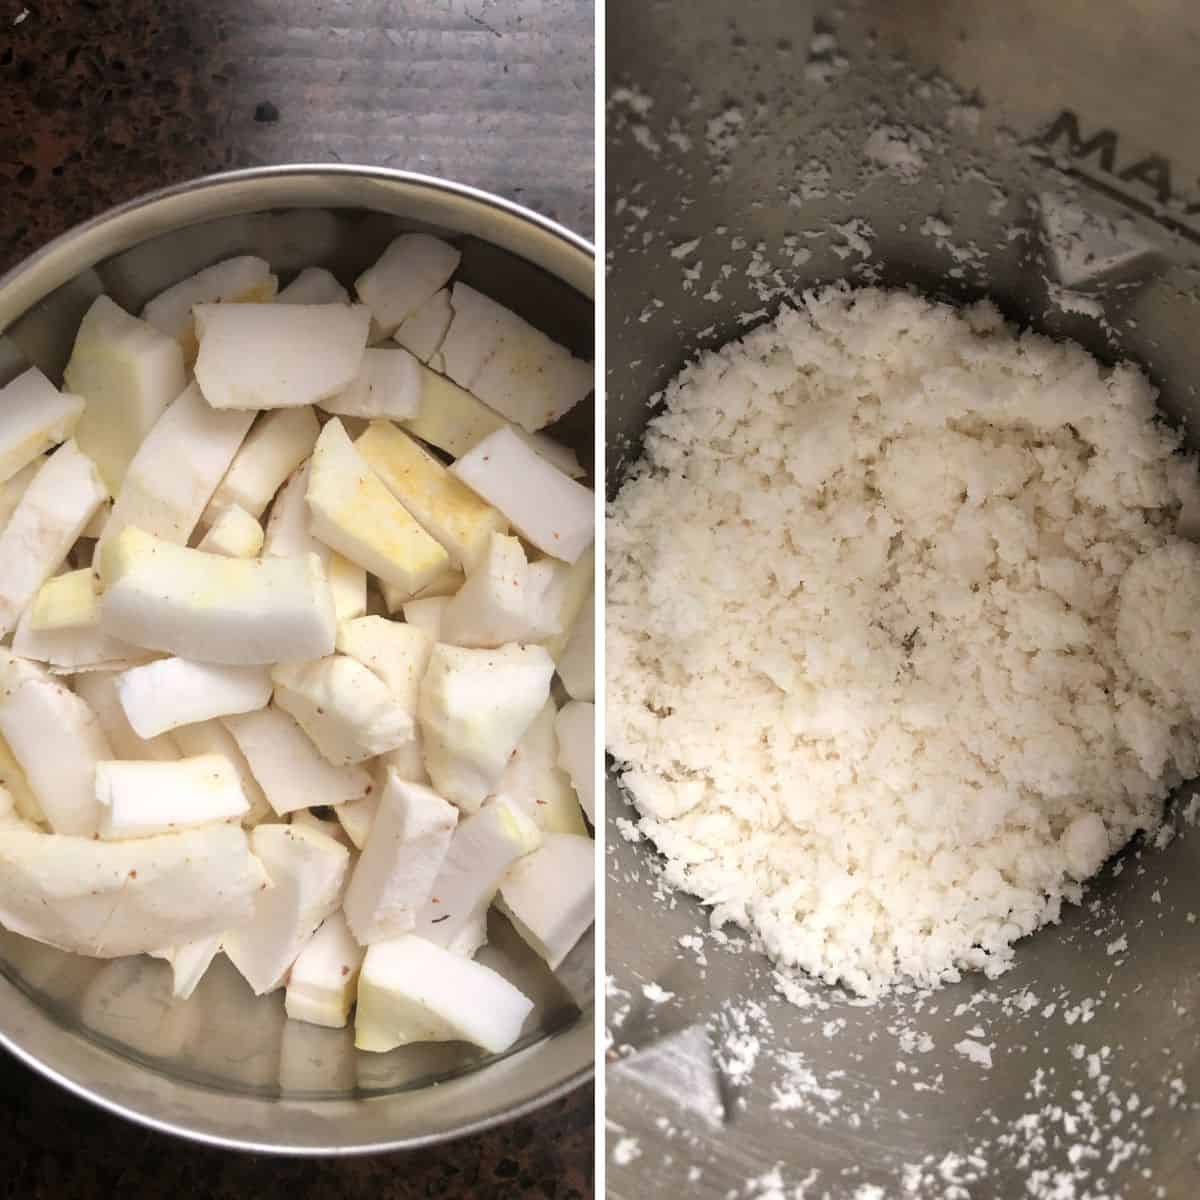 2 panel photo showing chopped and ground coconut.